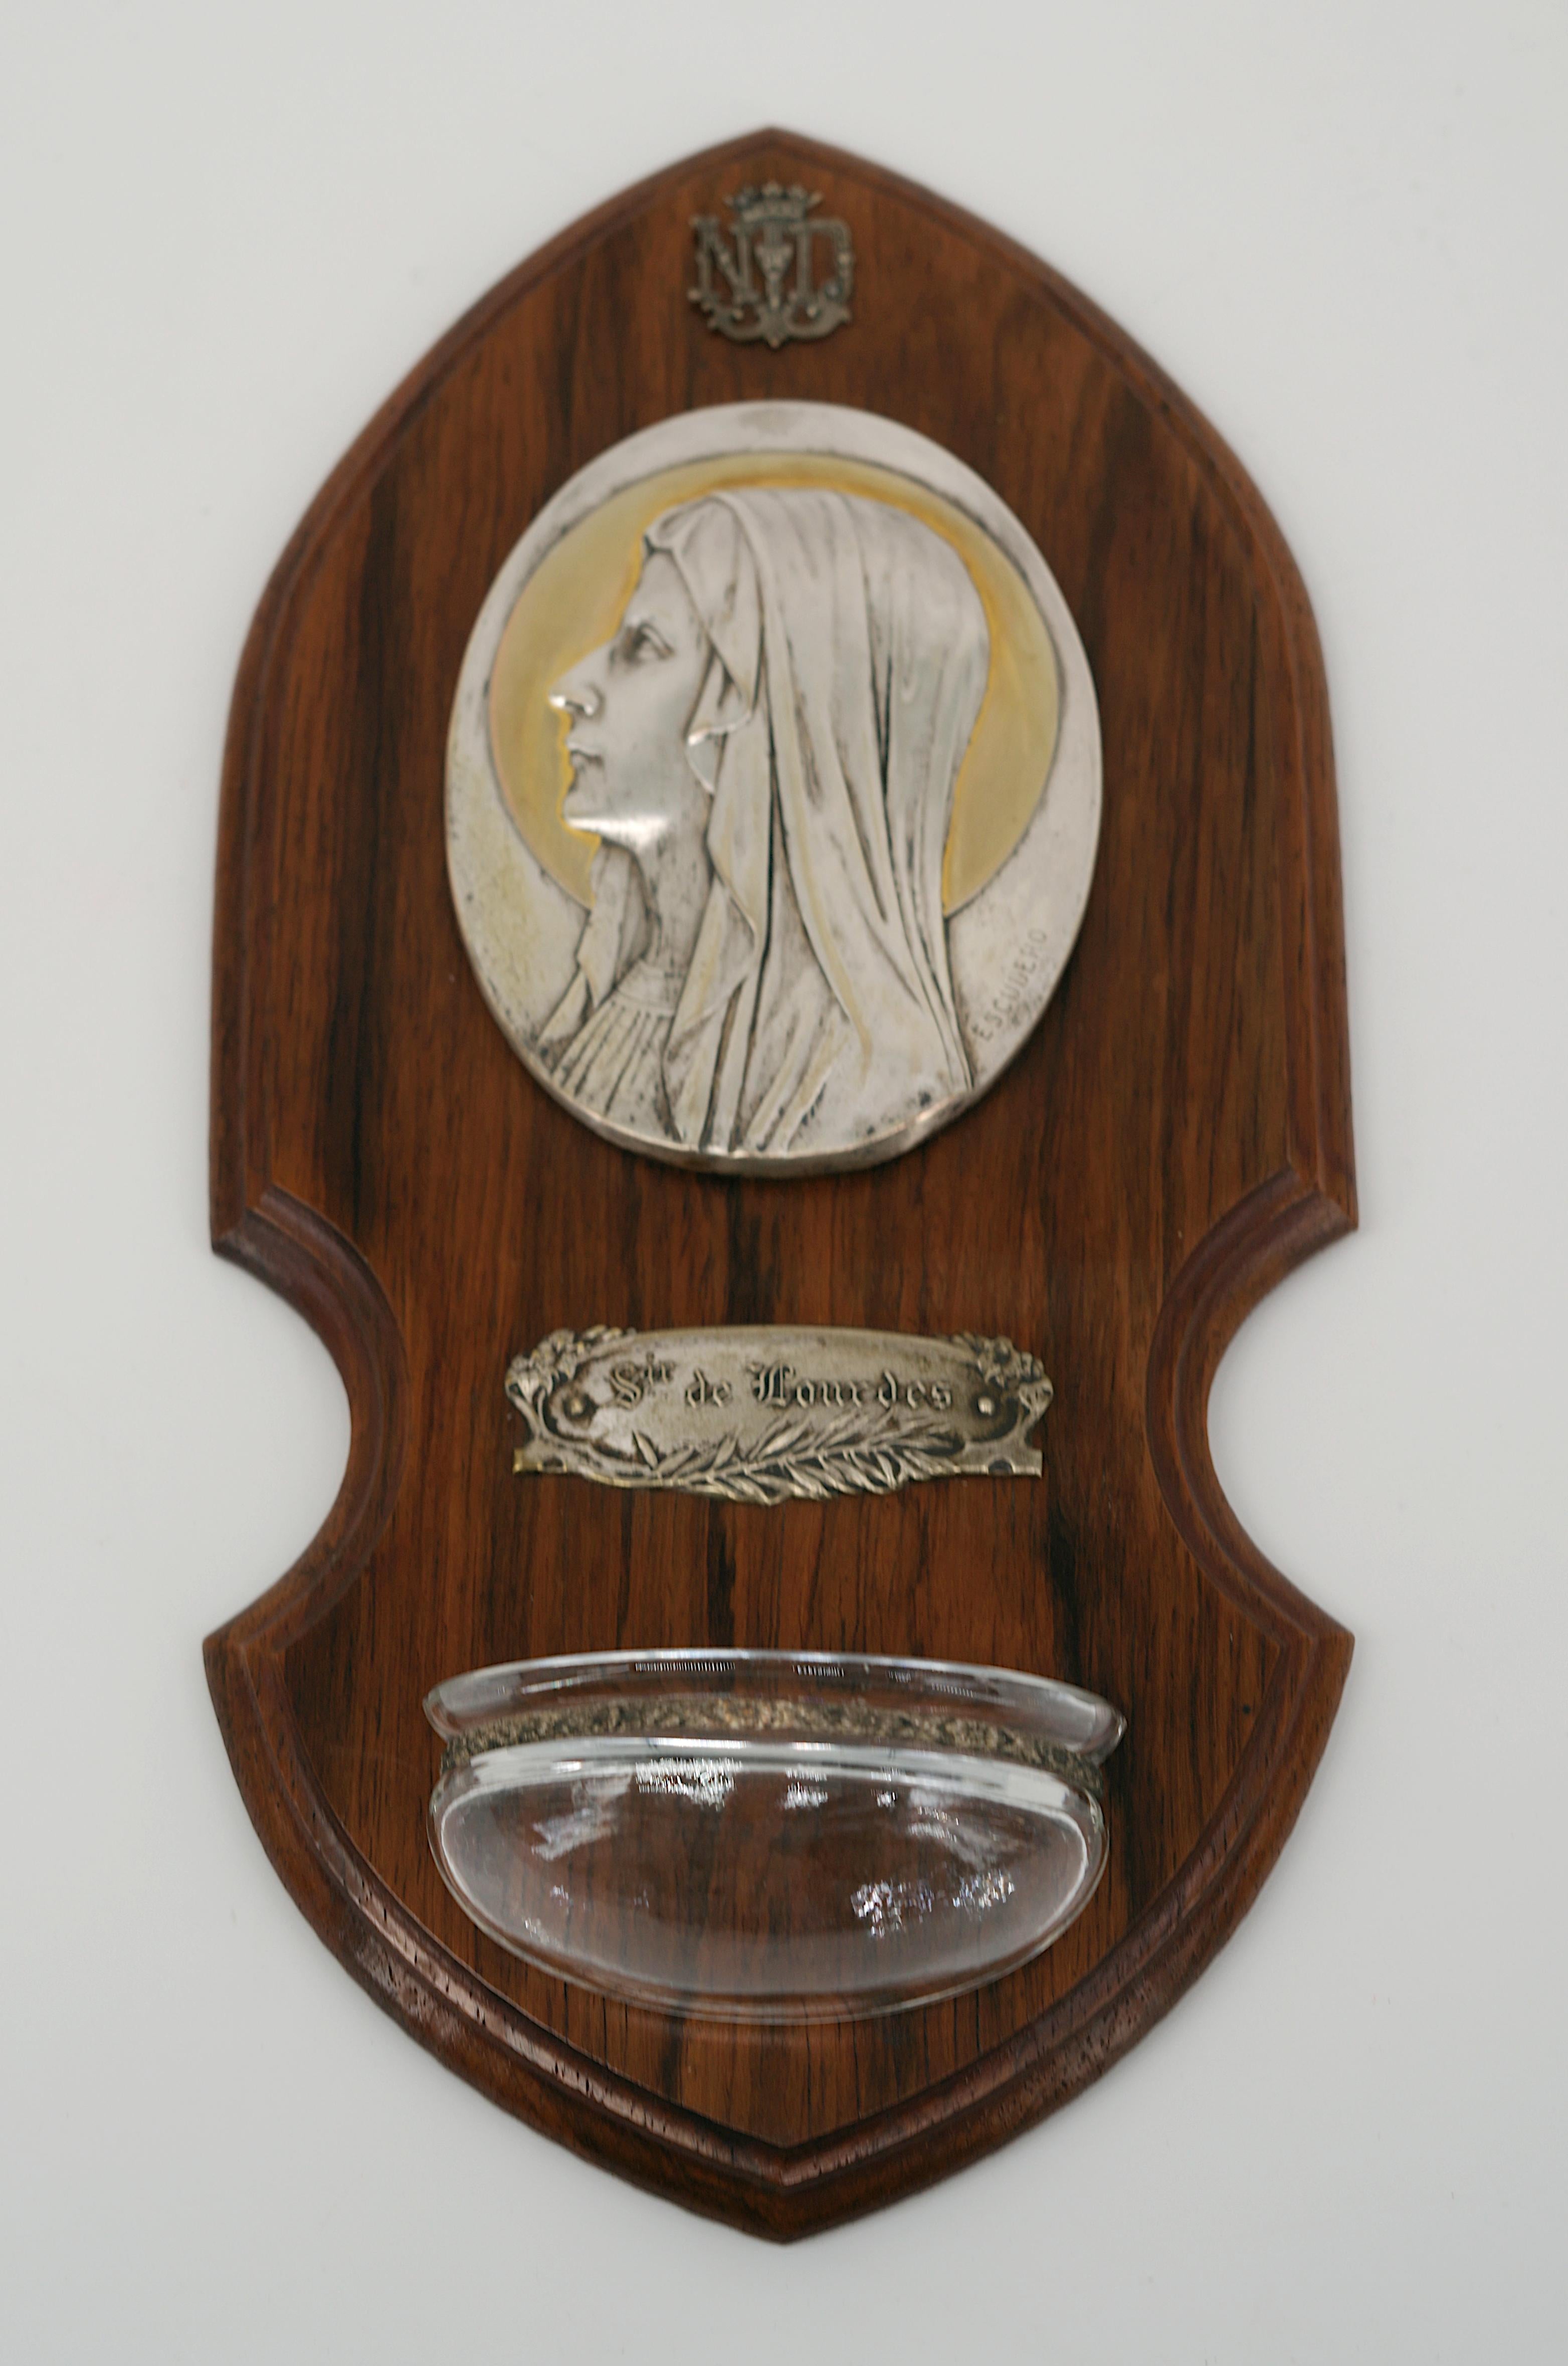 French Art Deco holy water font by Escudero, France, 1920s. Madonna - Notre-Dame-de-Lourdes. Metal and noble wood. Height : 9.25